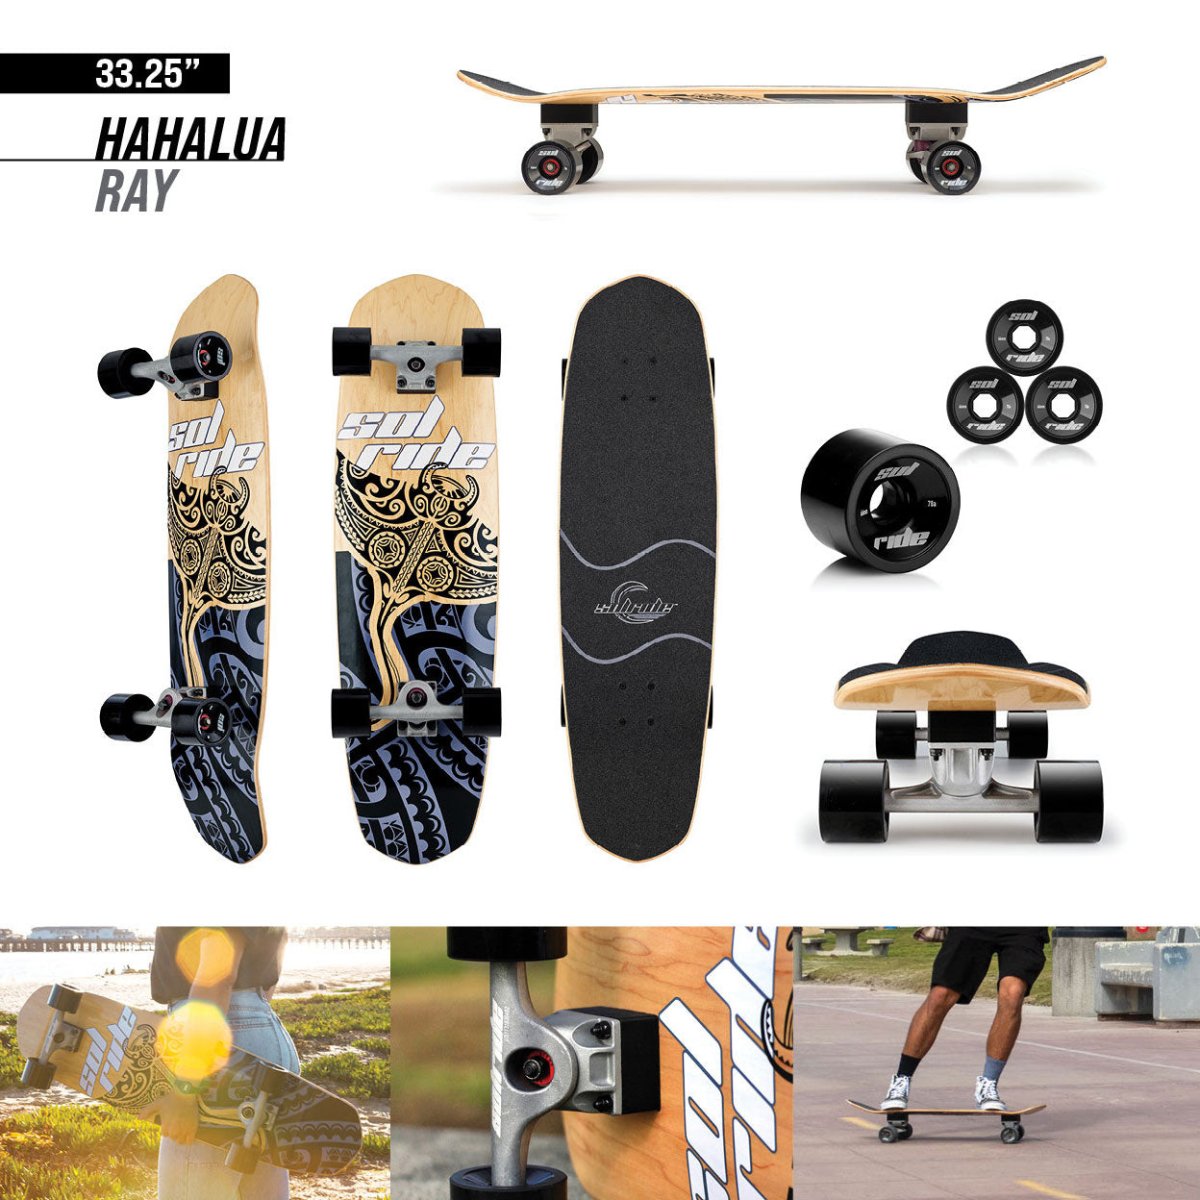 Solride Hahalua Ray 33.25" Complete - Surfskate - Completes